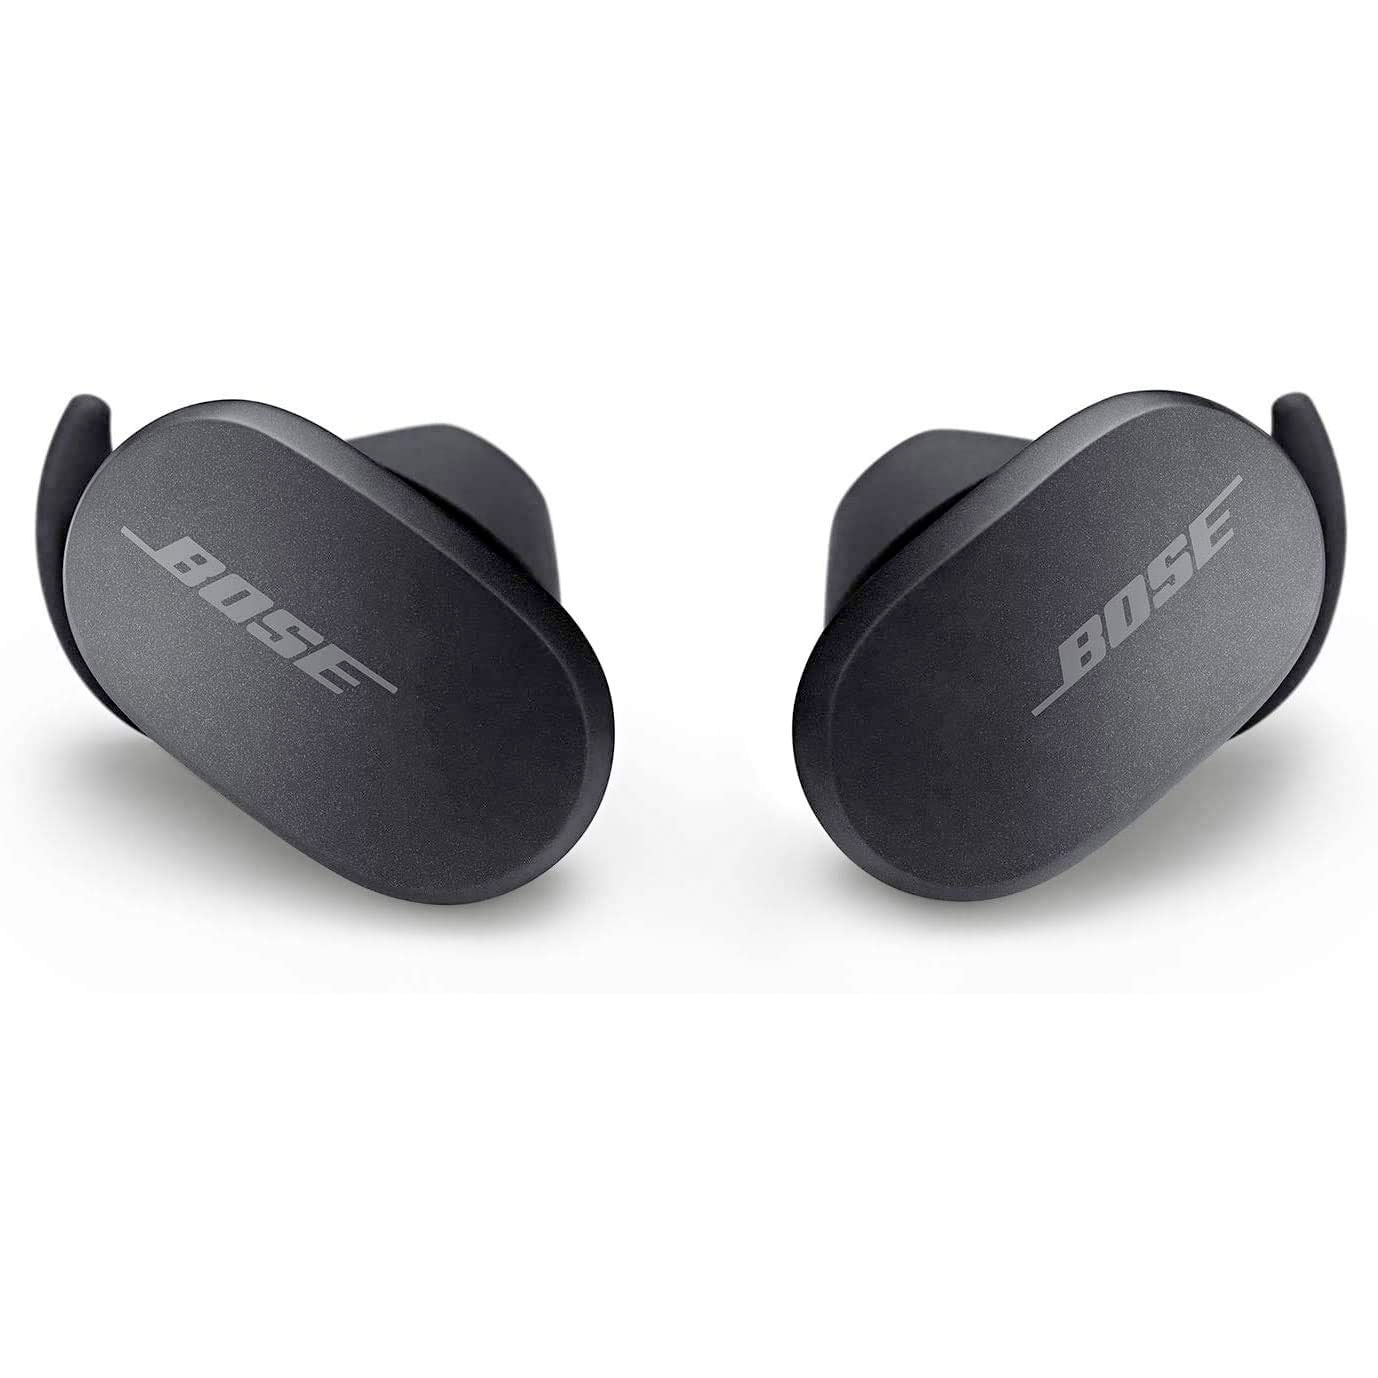 Amazon：Bose QuietComfort Noise Cancelling Earbuds只卖$249